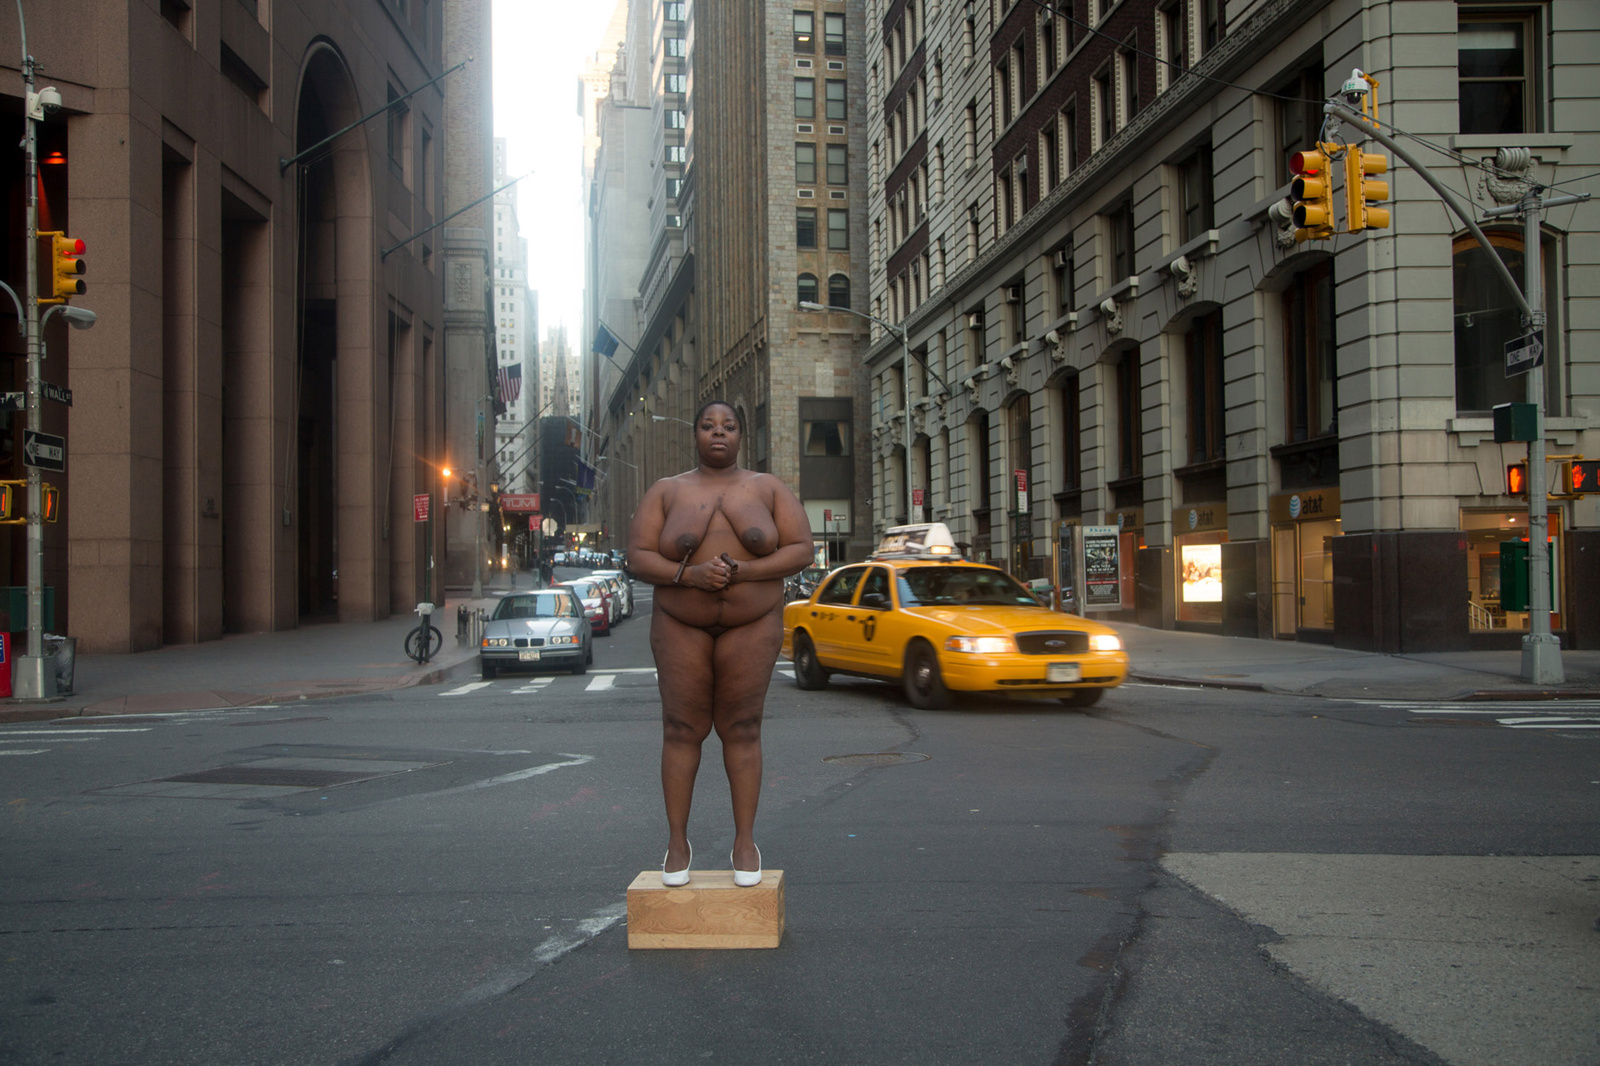 "From her body sprang their greatest wealth." Site of Colonial Slave Market - Wall Street. Nona Faustine